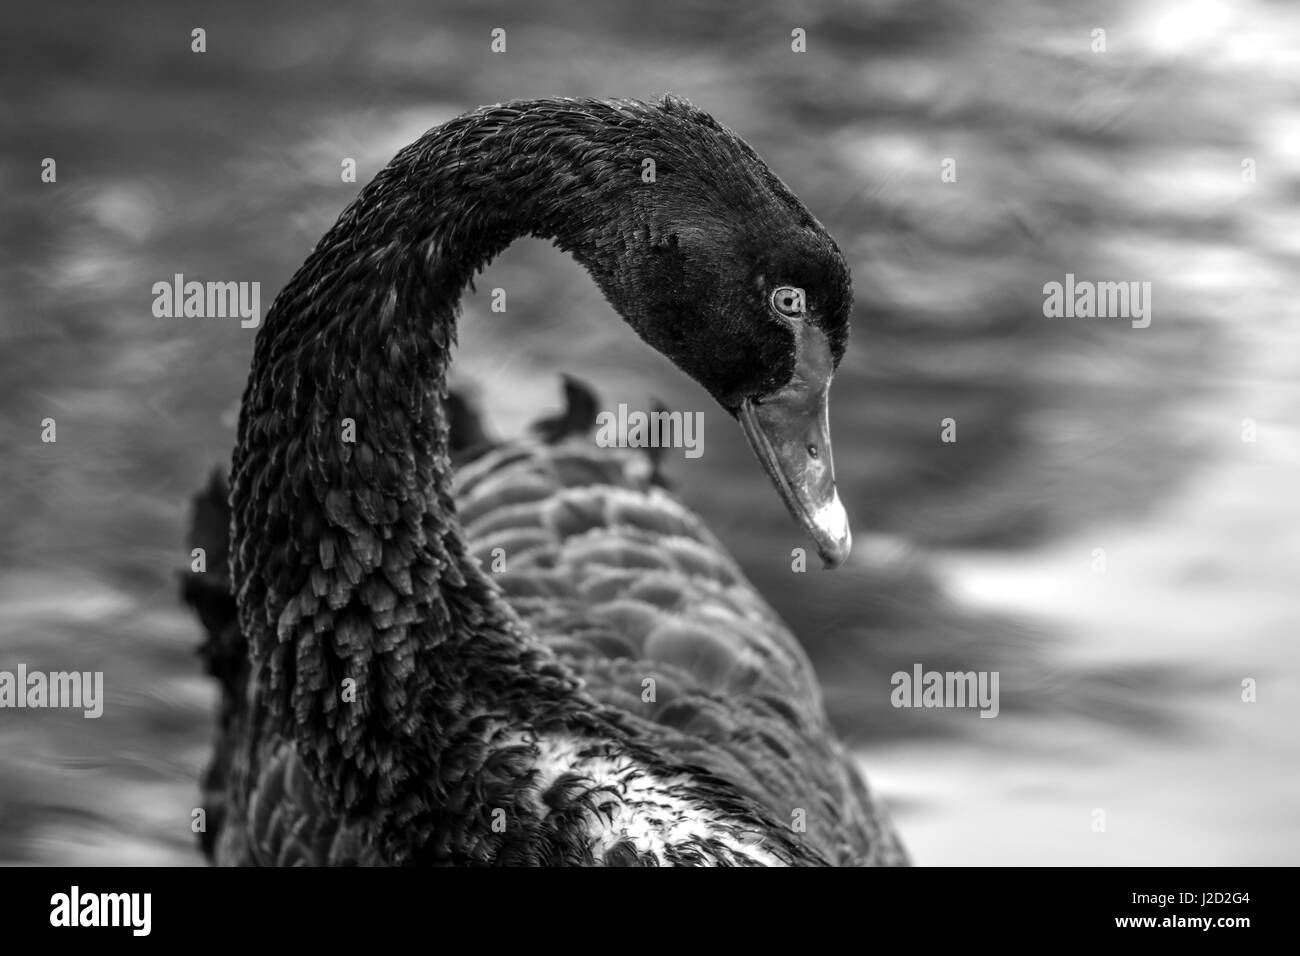 Black Swan. Rare beautiful bird. Not a typical black color for a swan. Red beak with a translucent white spot. Stock Photo